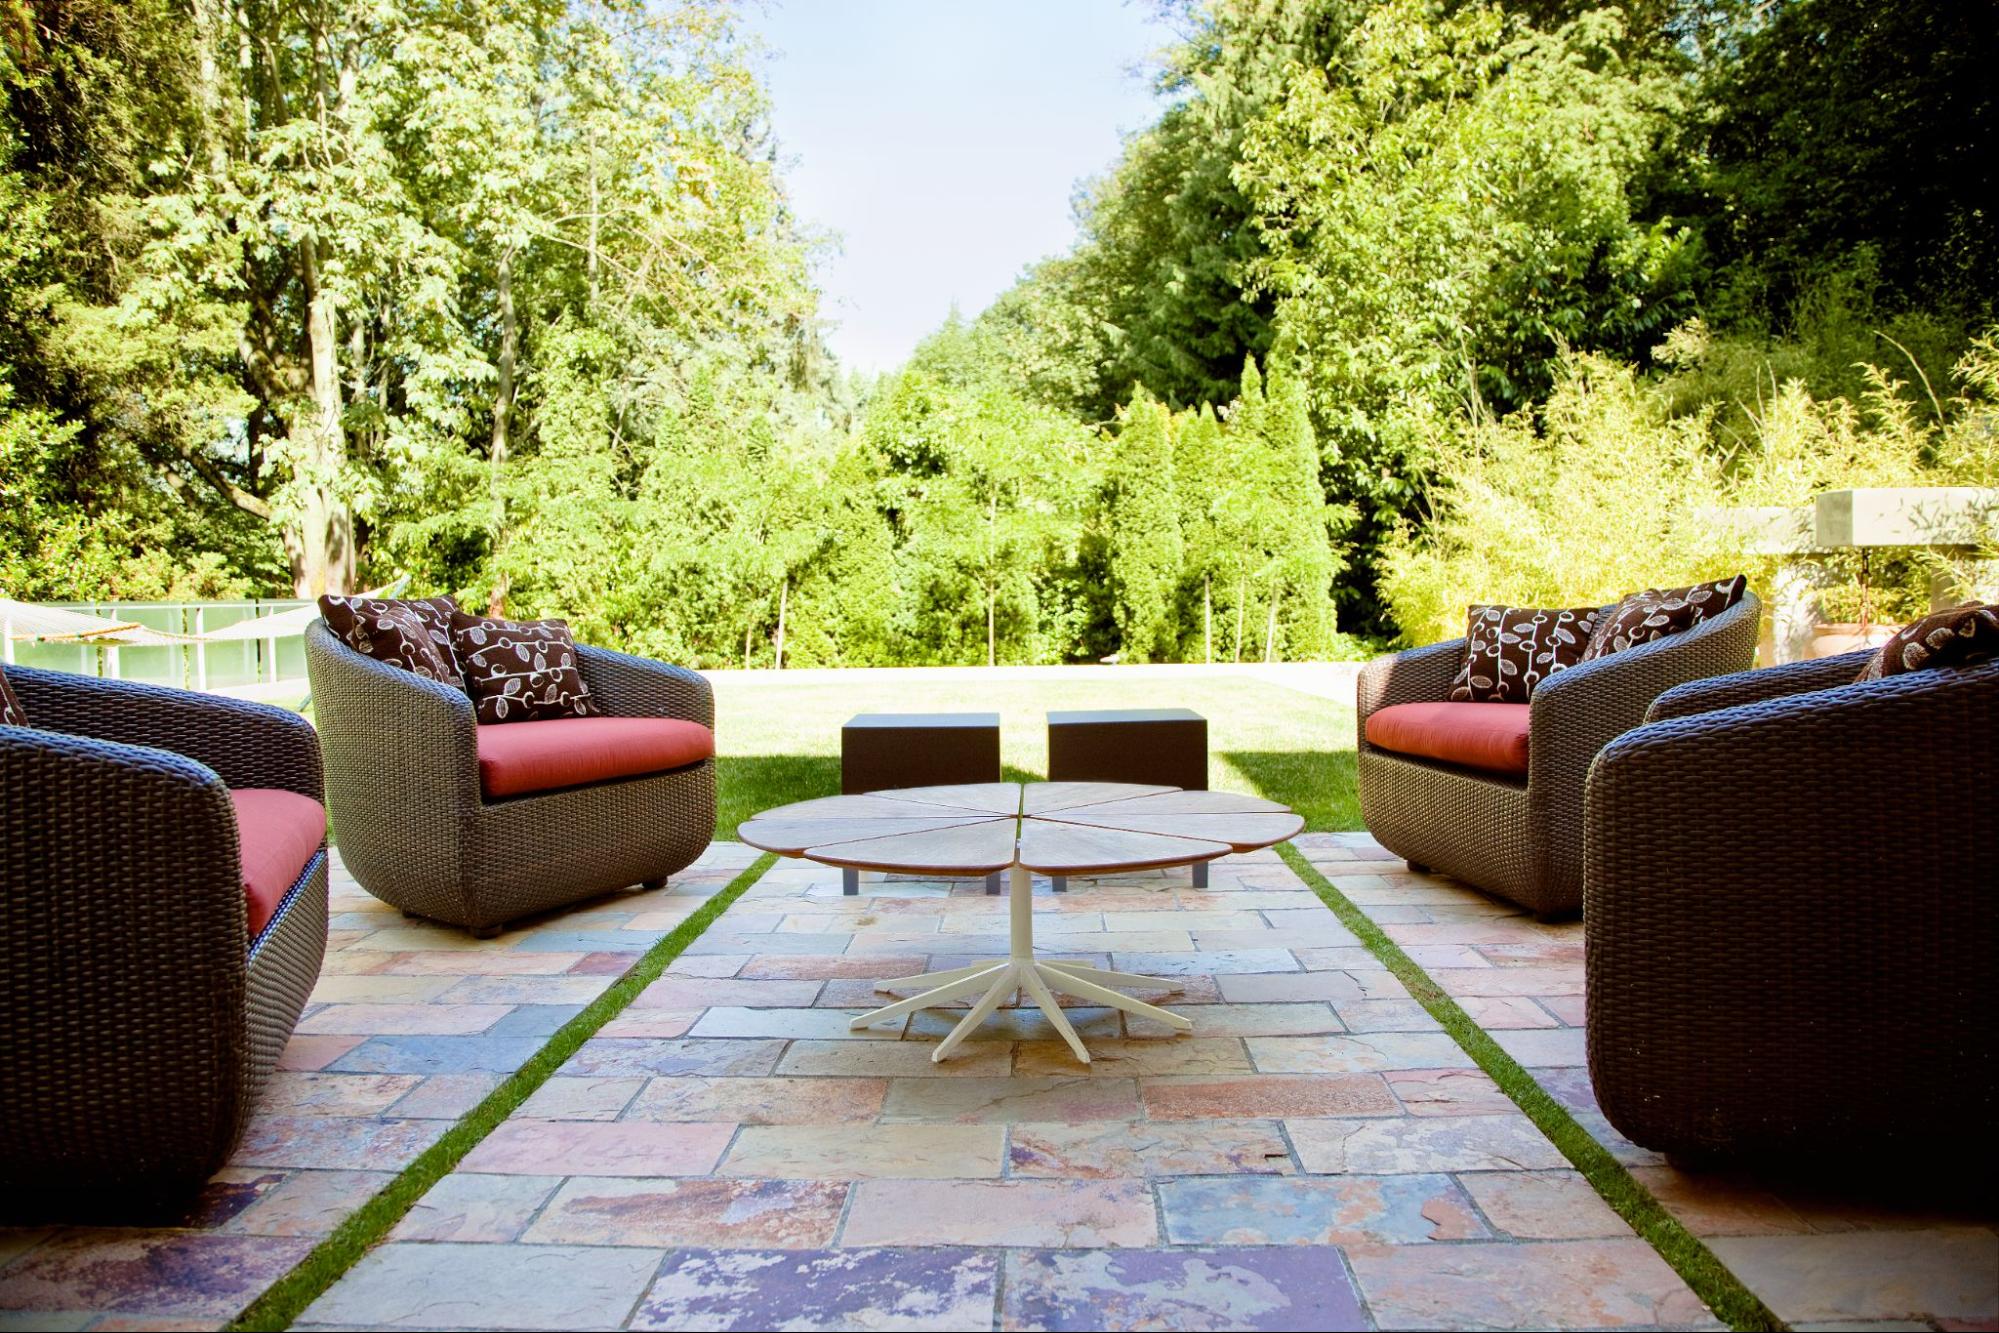 Outdoor Spaces Transformed: Staining Concrete Patios, Walkways, and Pool Decks